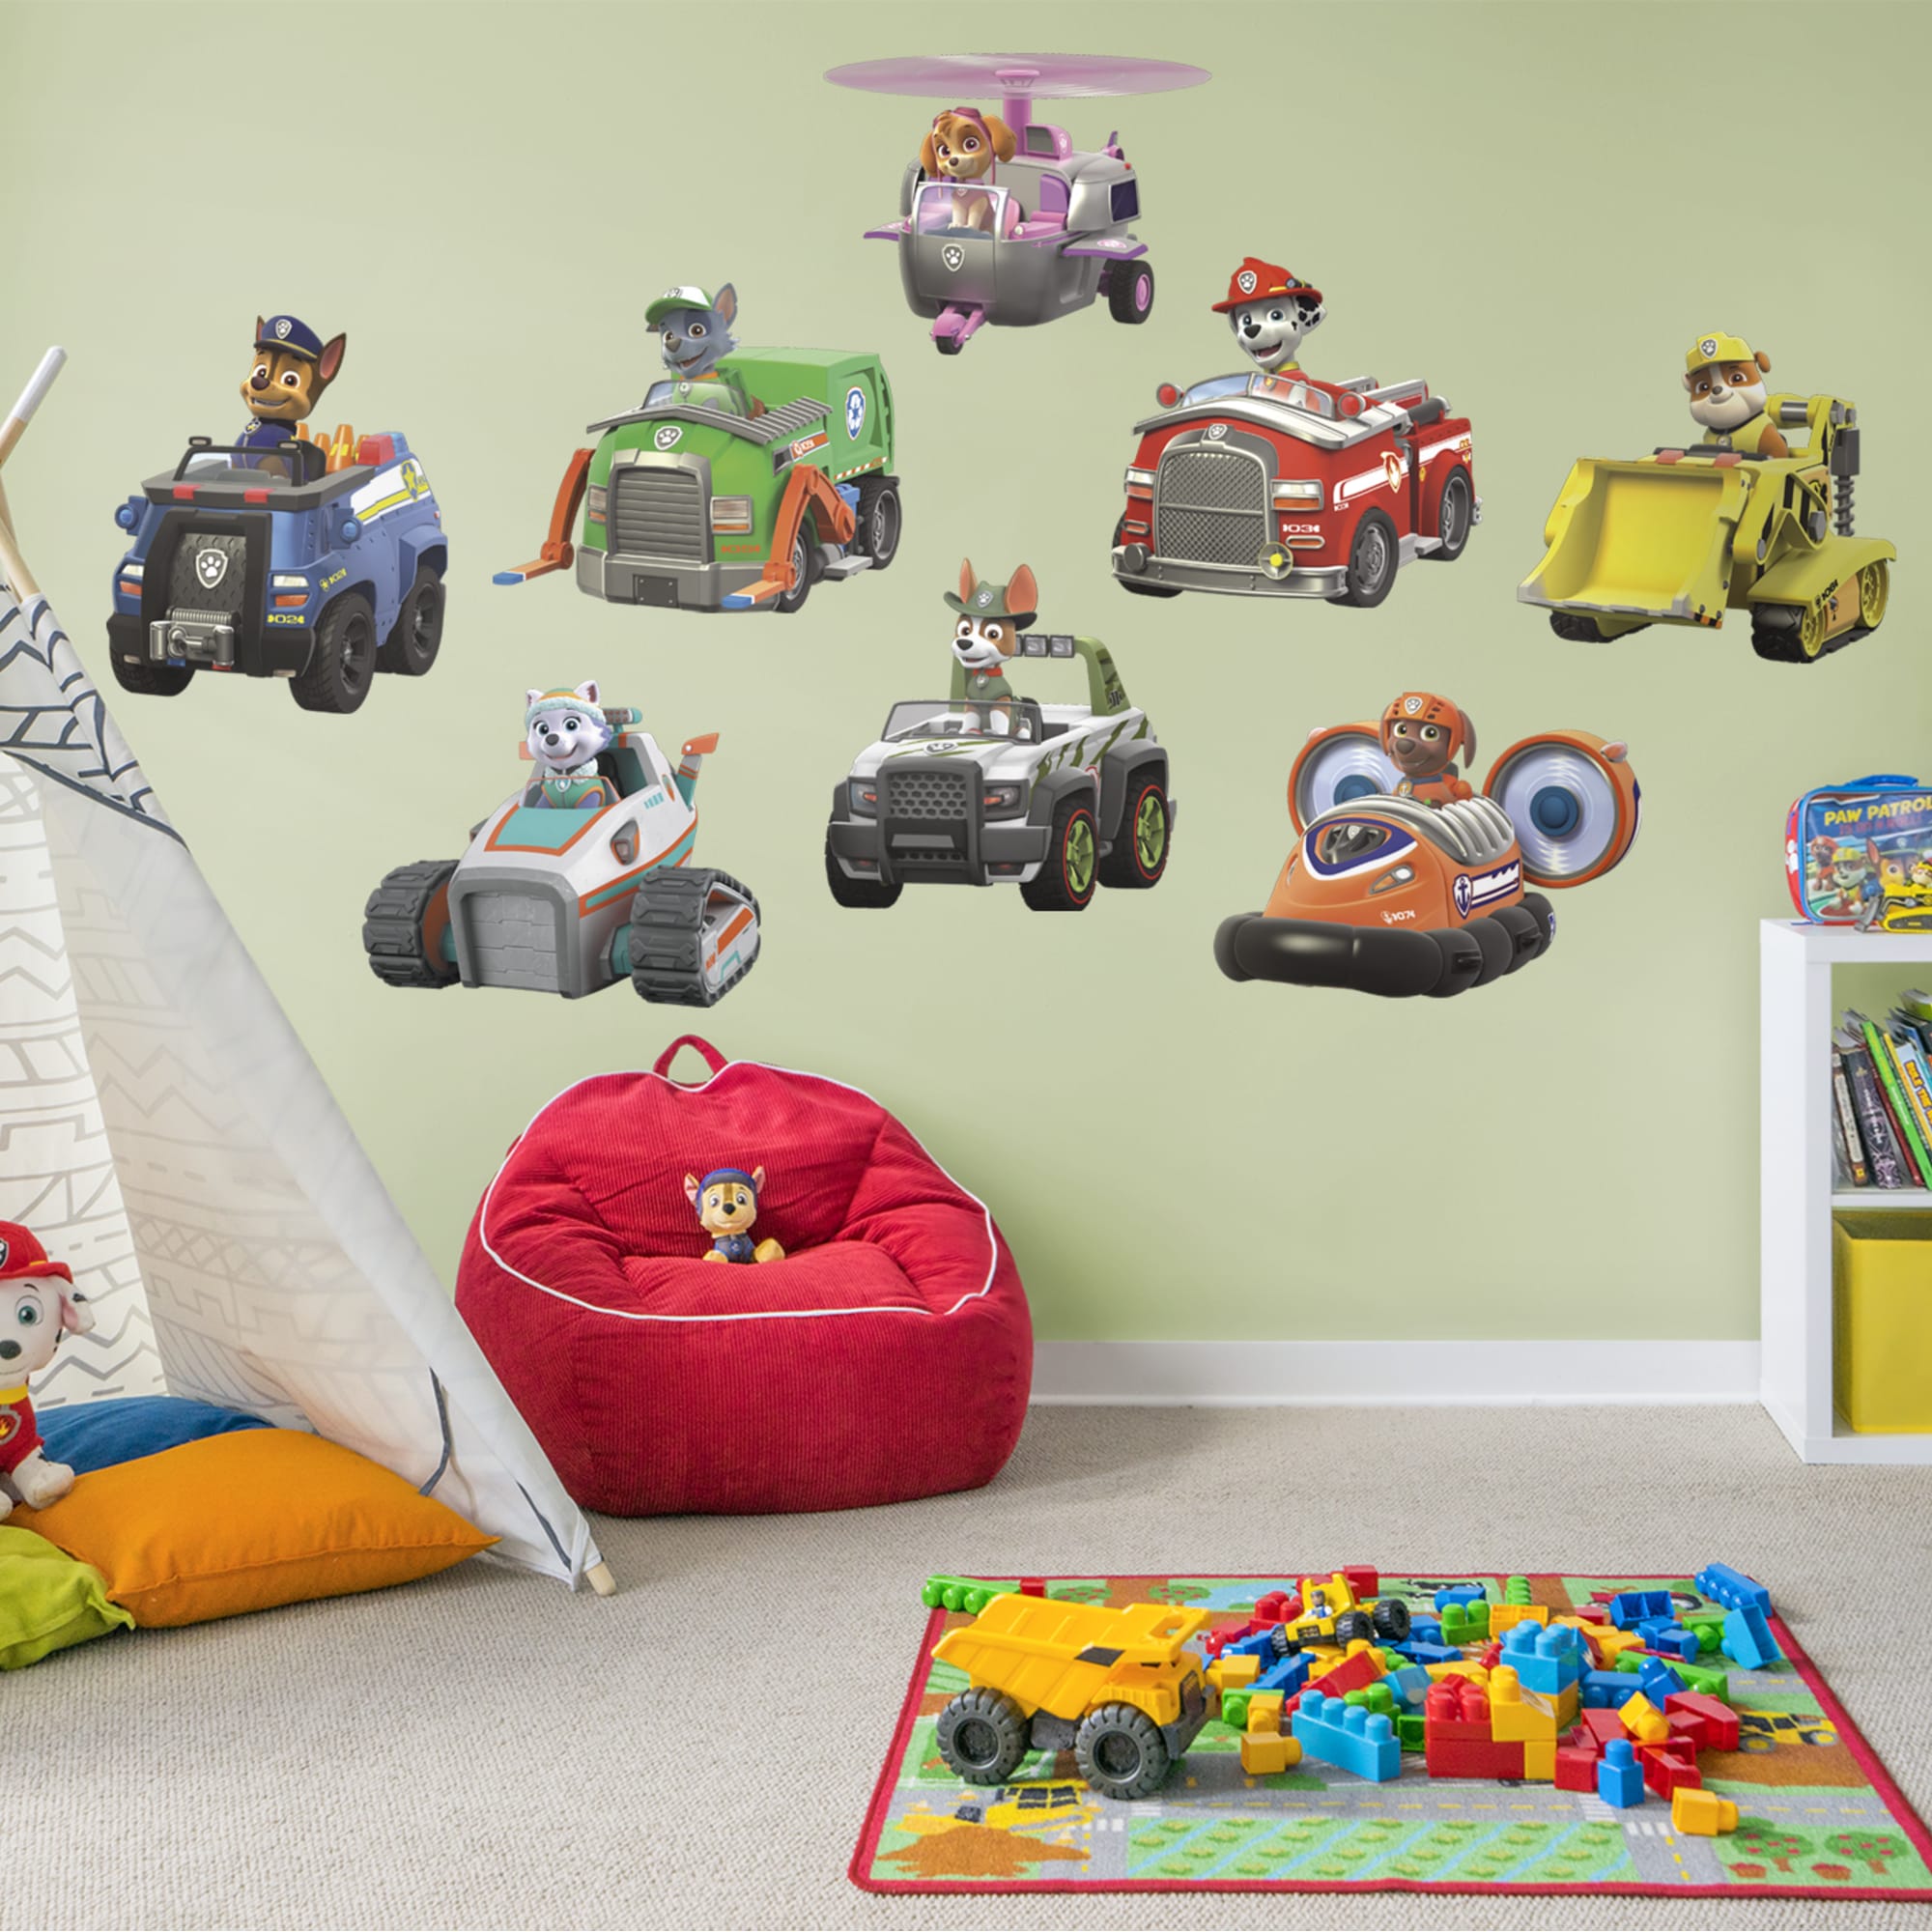 PAW Patrol: Vehicles Collection - Officially Licensed Removable Wall Decal 25.0"W x 20.0"H by Fathead | Vinyl